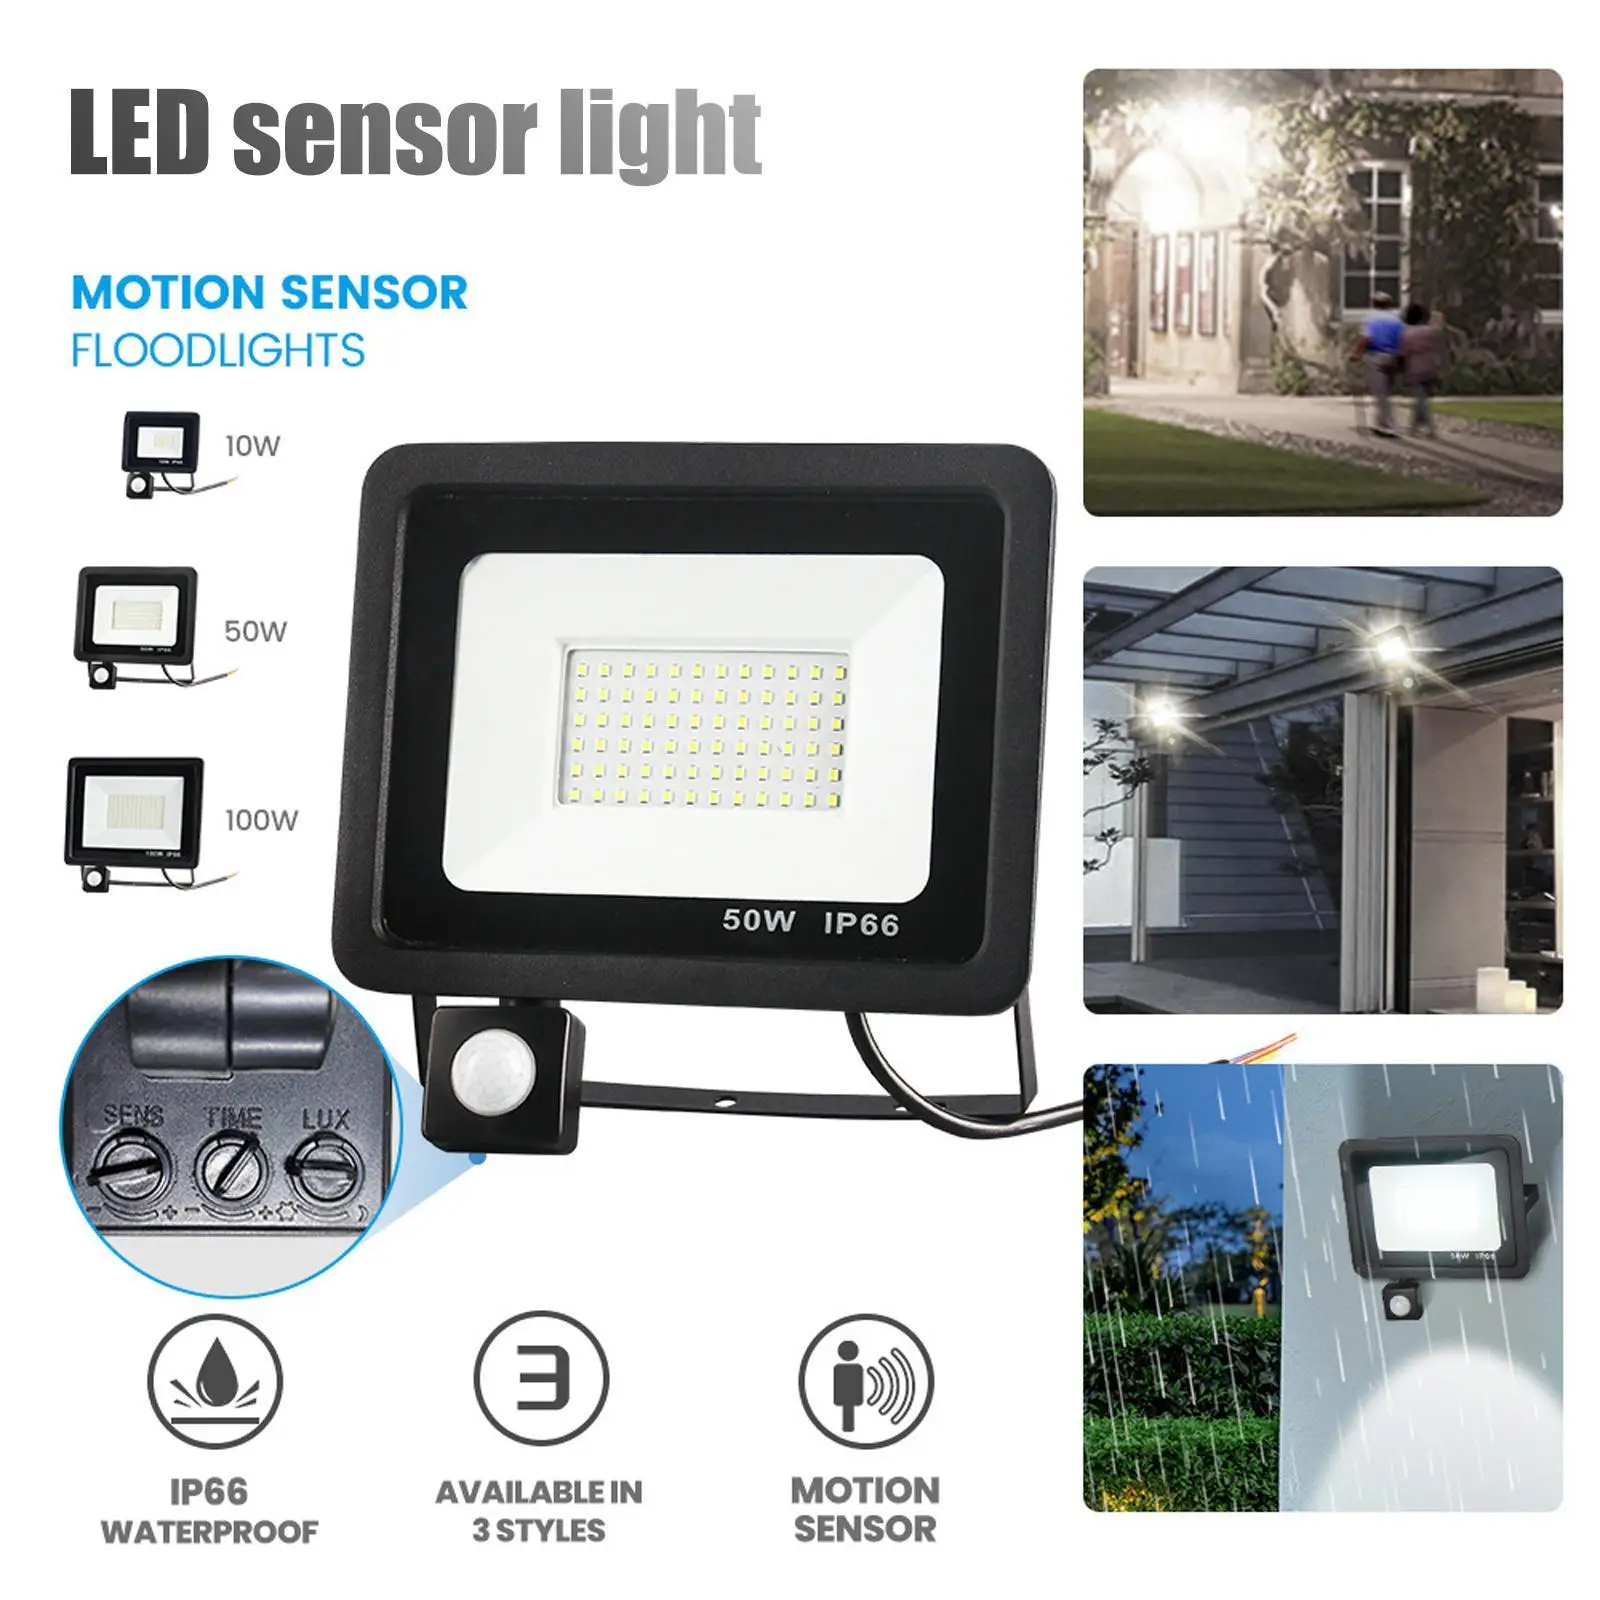 

LED FloodLight IP65 Waterproof AC220V 10W-100W Motion Sensor And Without Motion Sensor Type For Outdoor Garden Using